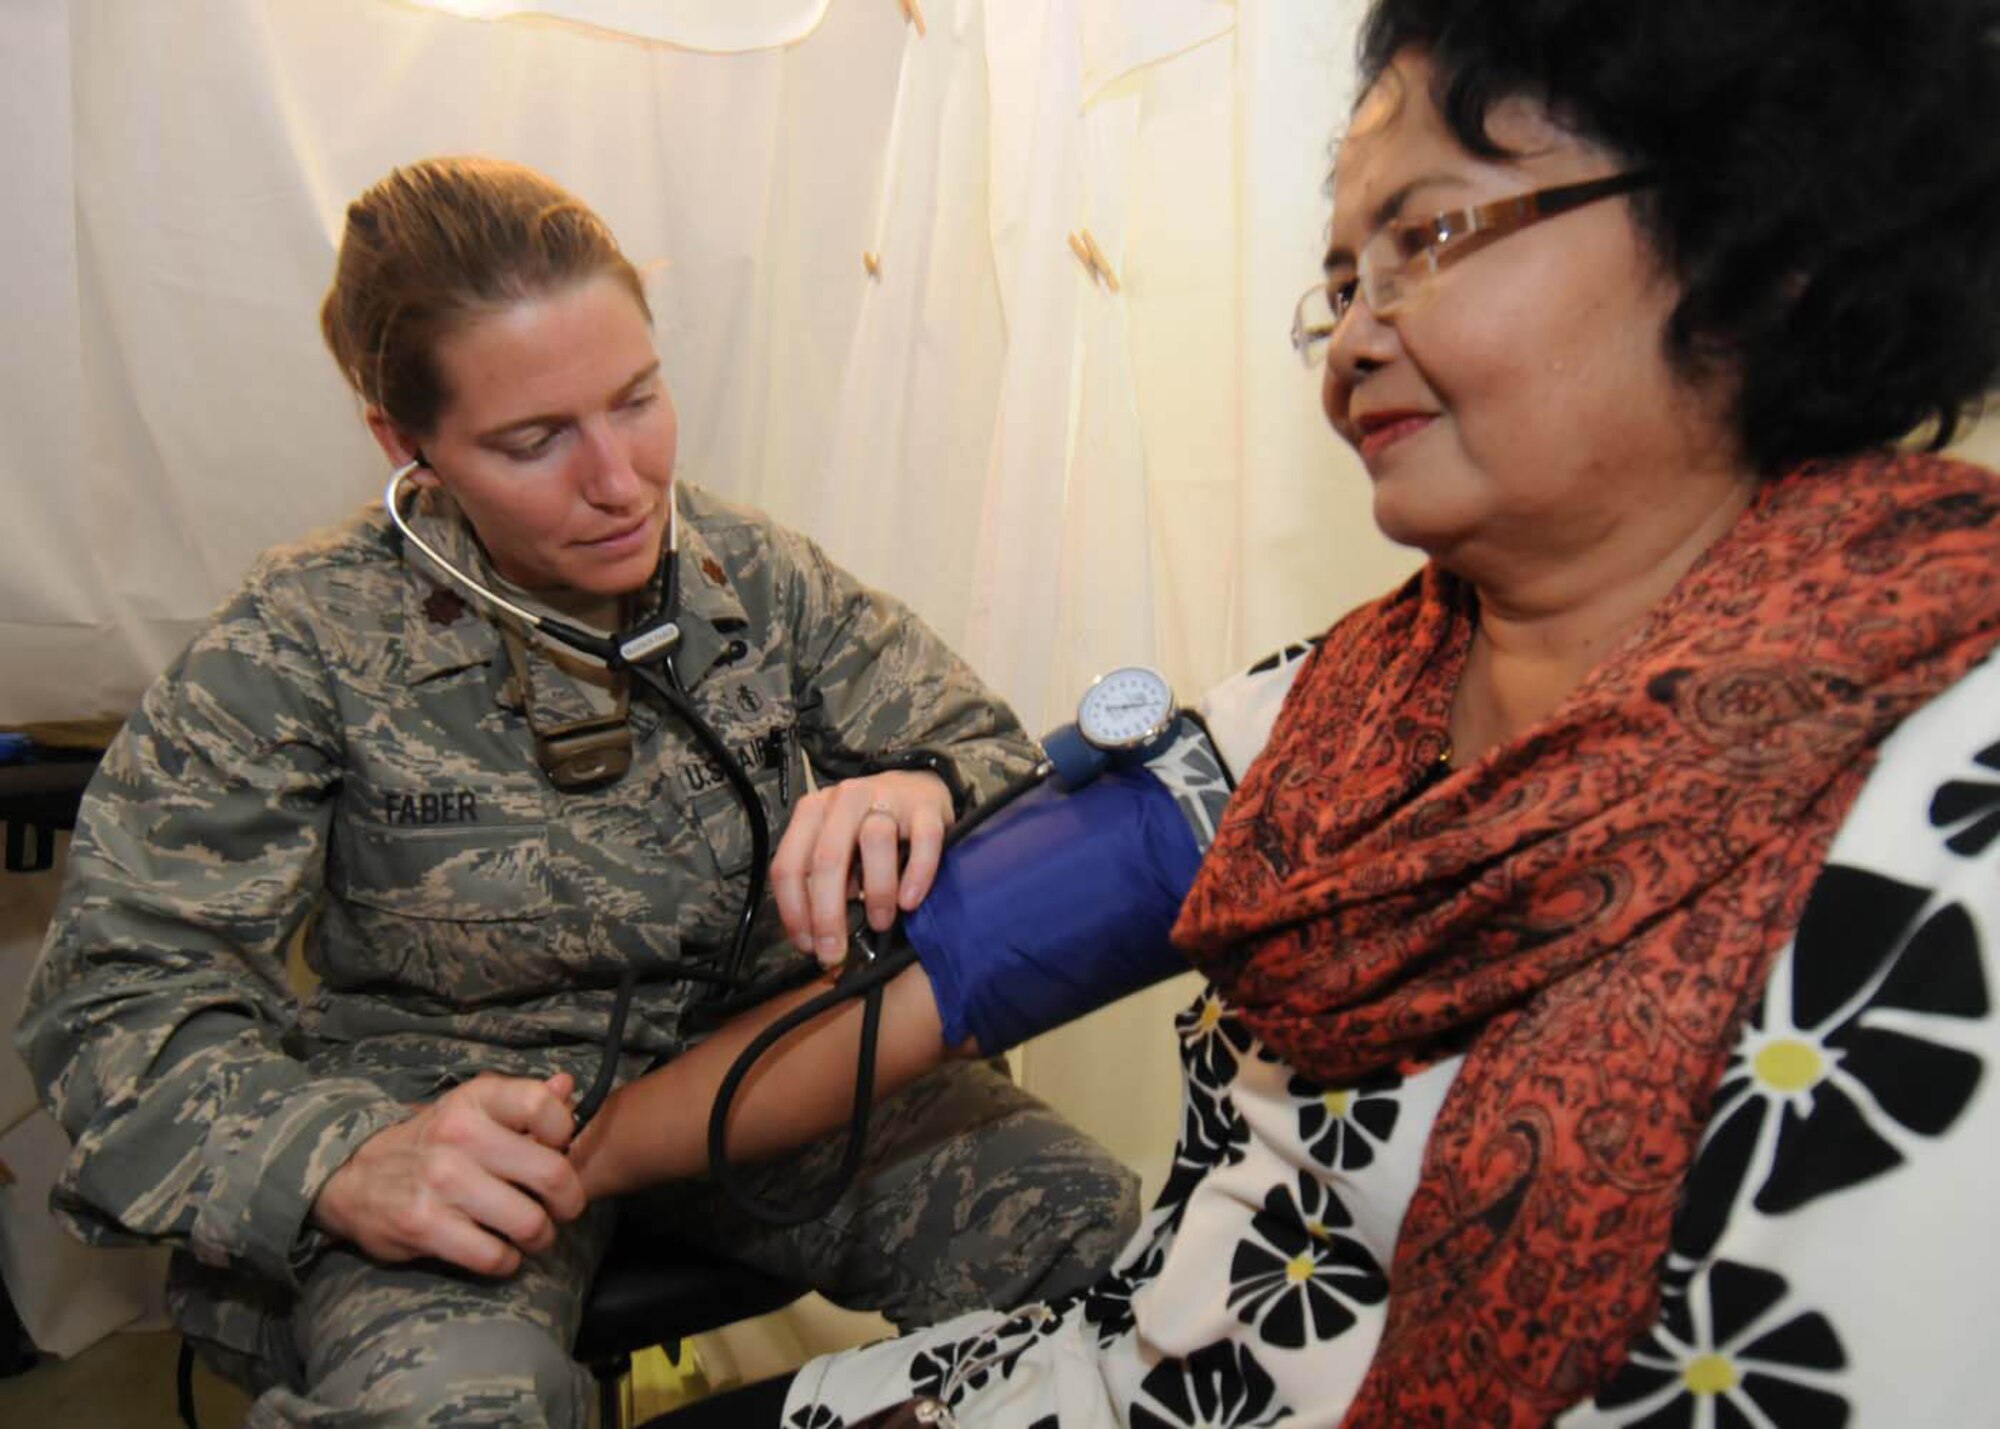 Maj. Shannon Faber checks a patient's blood presure during a medical assessment at a mobile field hospital in Padang, Indonesia, Oct. 8. Major Faber, an emergency medical doctor from the 3rd Medical Operations Squadron at Elmendorf Air Force Base, Alaska, is deployed here with an Air Force humanitarian assistance rapid response team. (U.S. Air Force photo/Staff Sgt. Veronica Pierce)